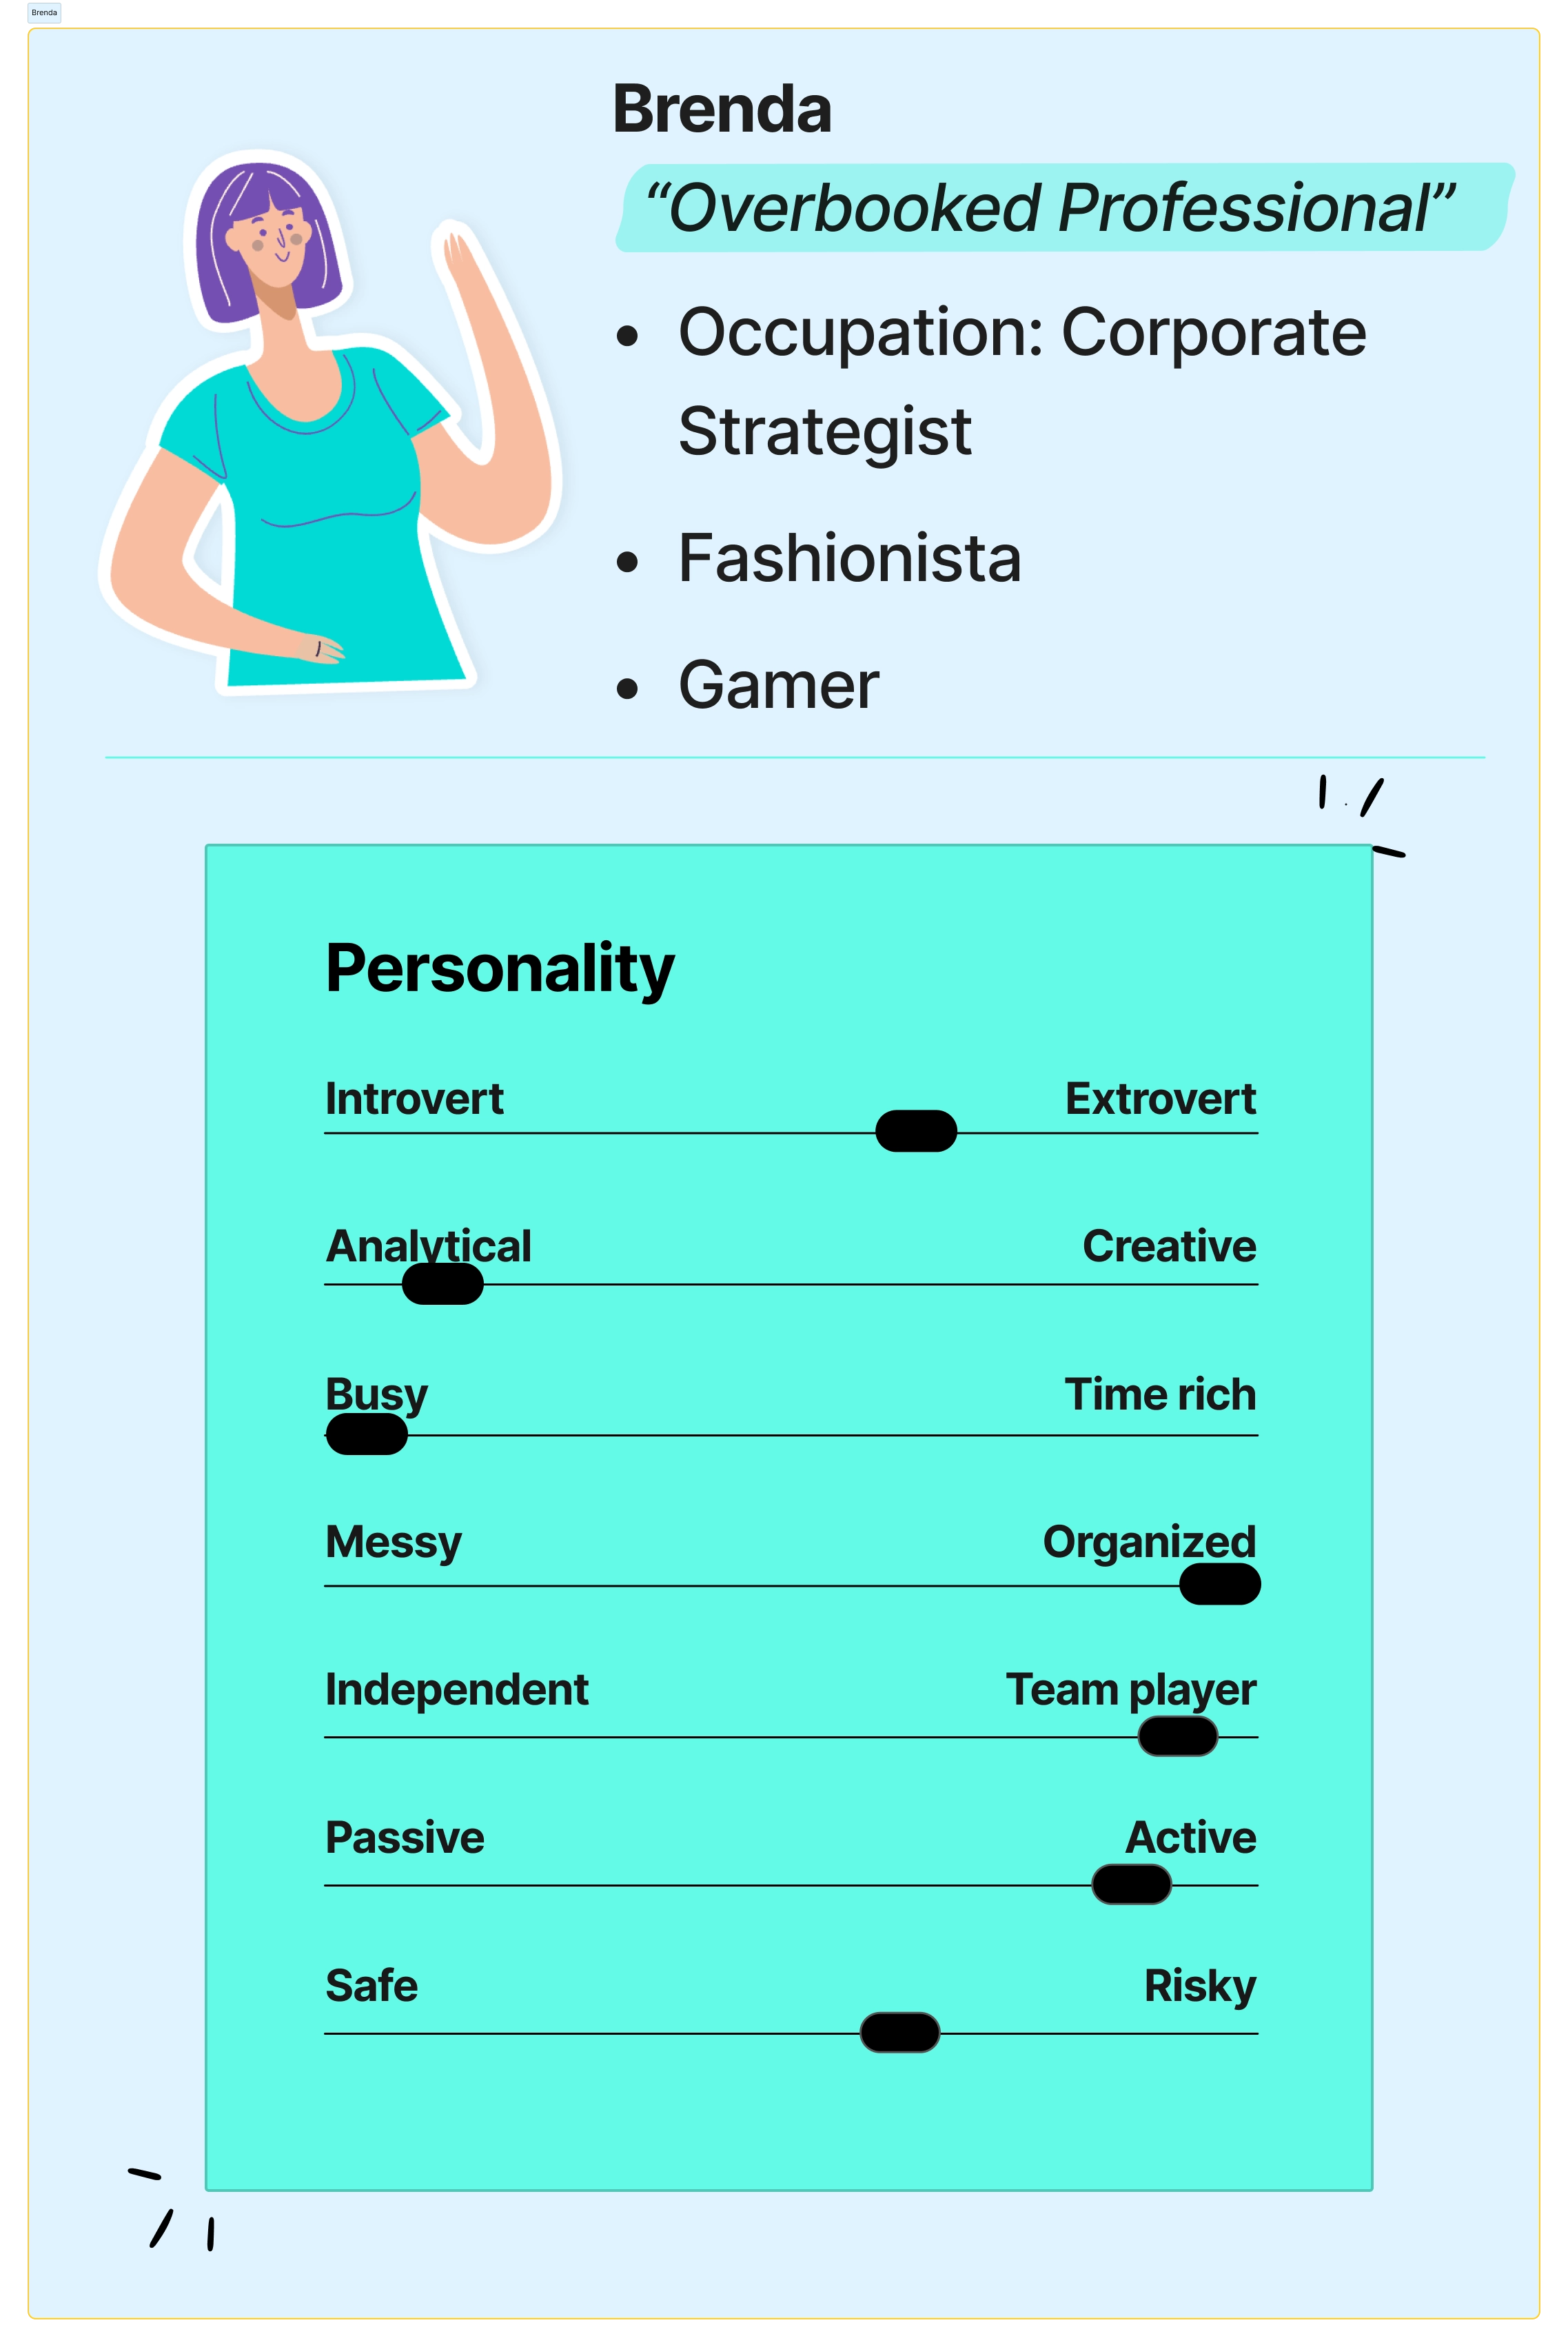 A cartoon woman with purple hair and a teal t-shirt appears next to some information. 'Brenda, overbooked professional, occupation: corporate strategist, fashionista, gamer. Personality: extroverted, analytical, busy, organized, team player, active, balances safety with risk.'